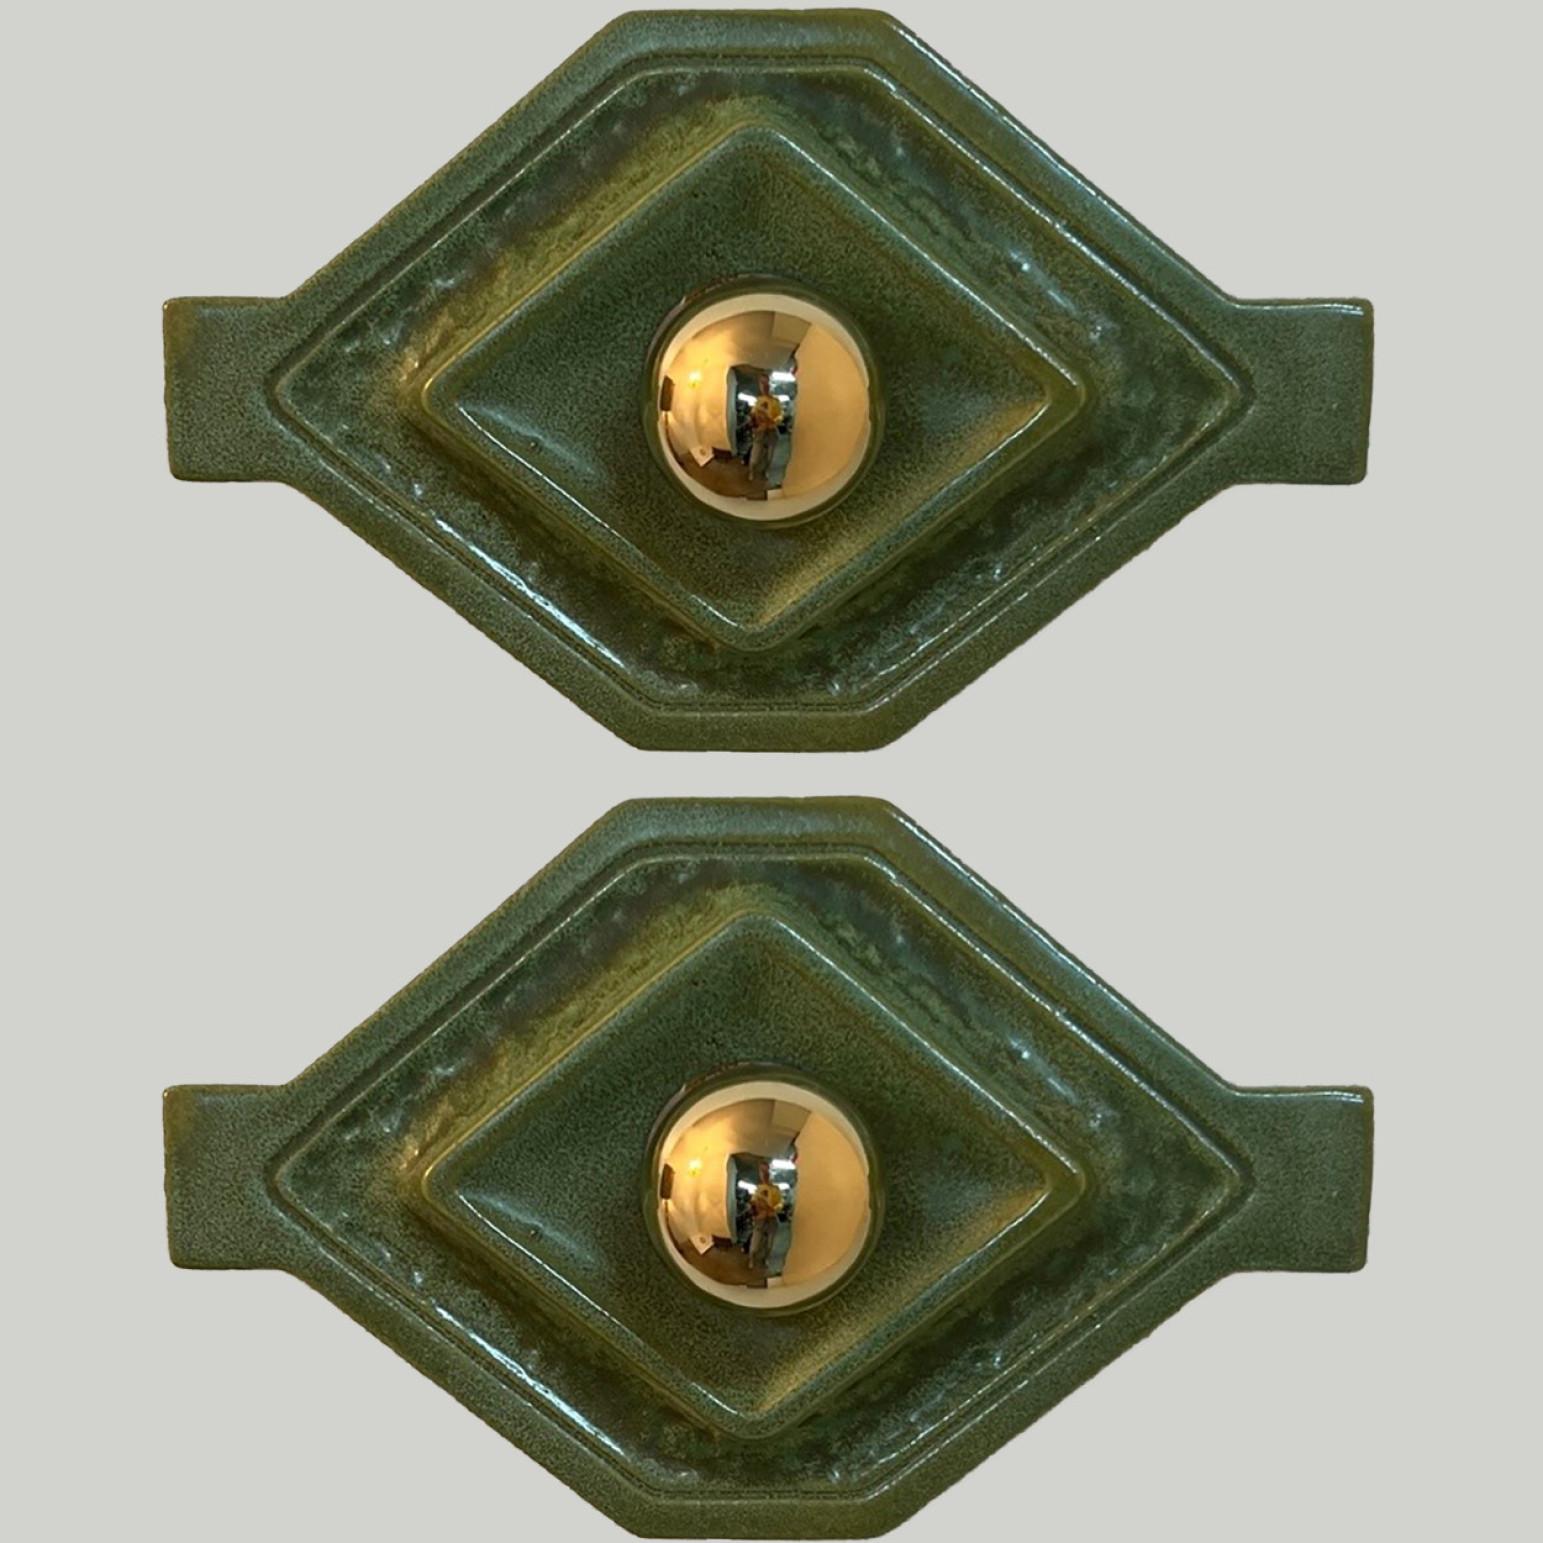 Diamond-shaped green ceramic wall lights in Fat Lava style. Manufactured by Hustadt Leuchten Keramik, Germany in the 1970s.

The style of the glaze is called 'Fat Lava'. Which means the glaze is thick on some parts, like lava.
A typical way to